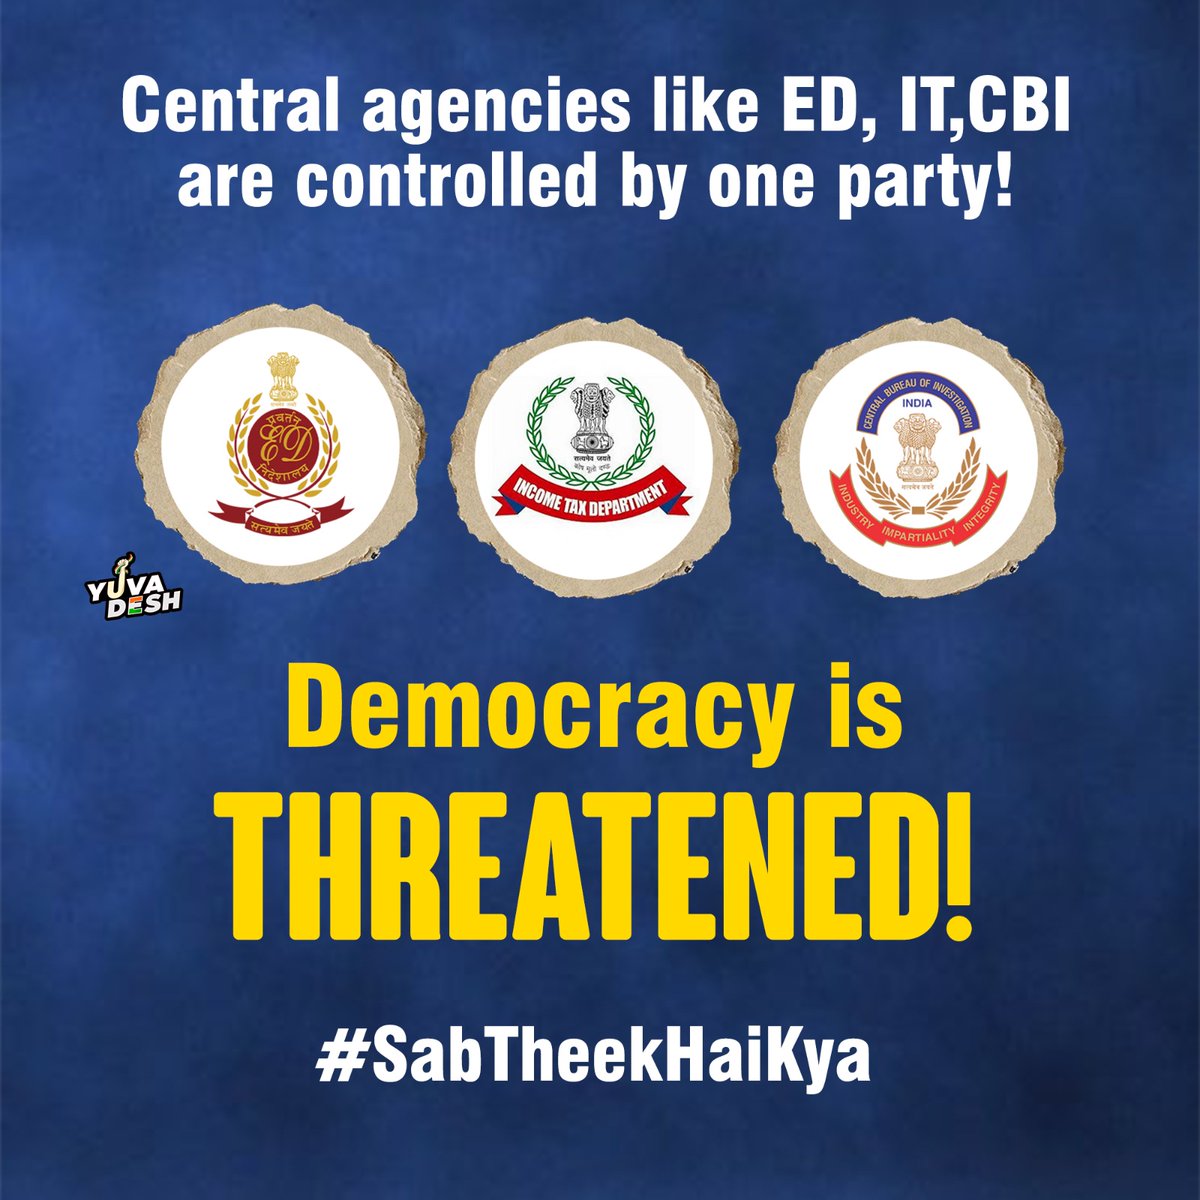 Central agencies like ED, IT, CBI are controlled by one party. Democracy is threatened.
#SabTheekHaiKya